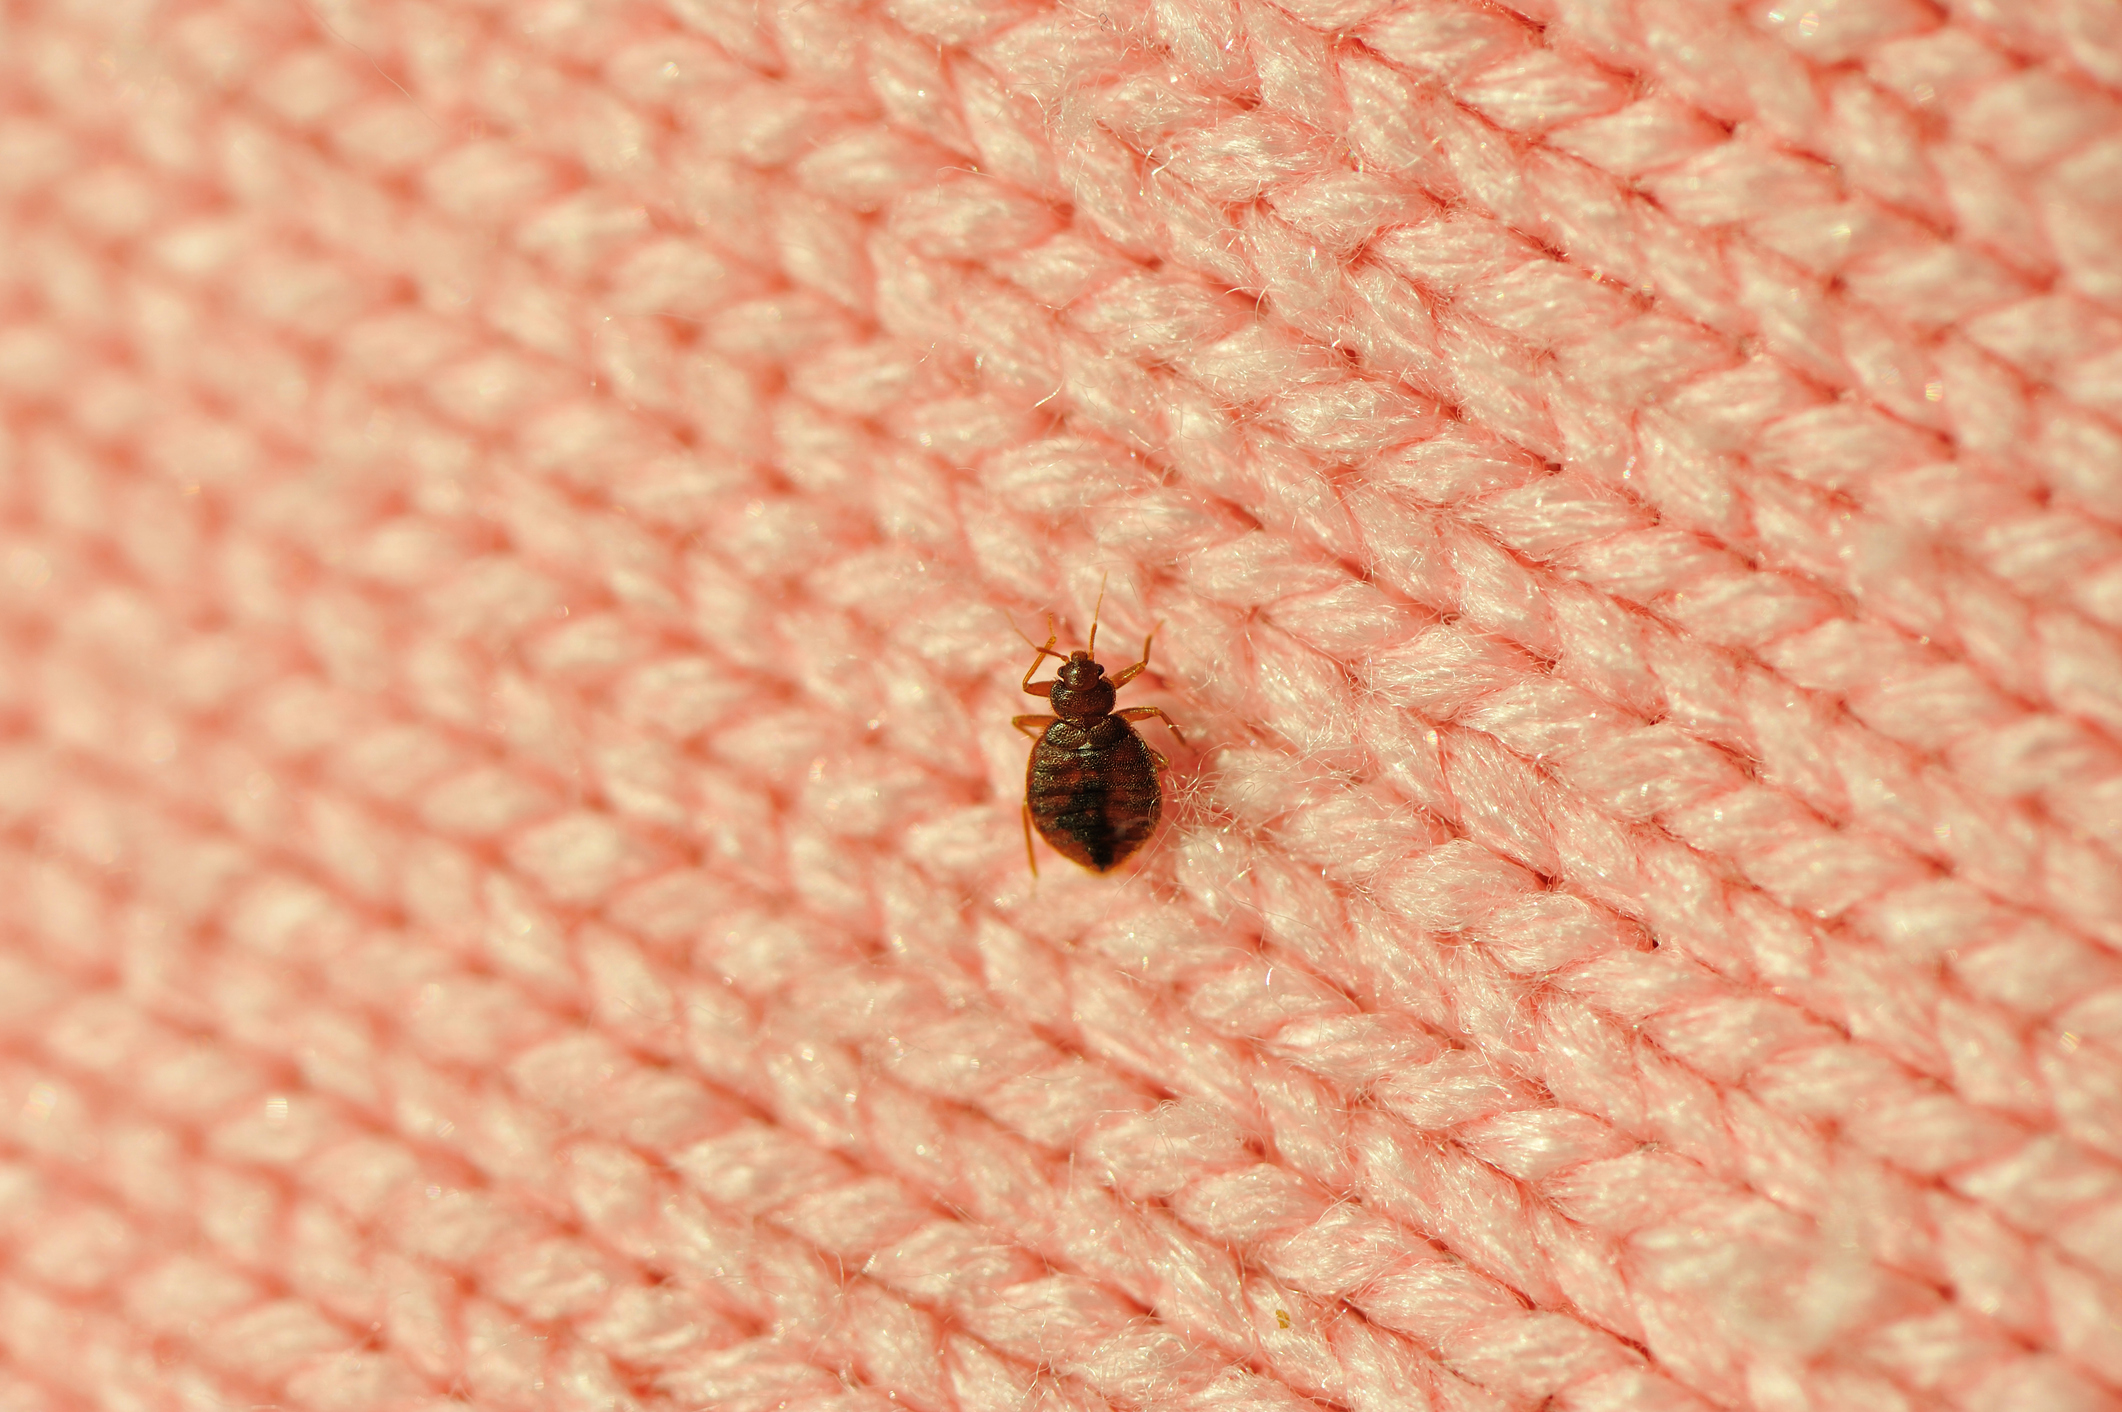 How To Kill Bed Bugs With Heat